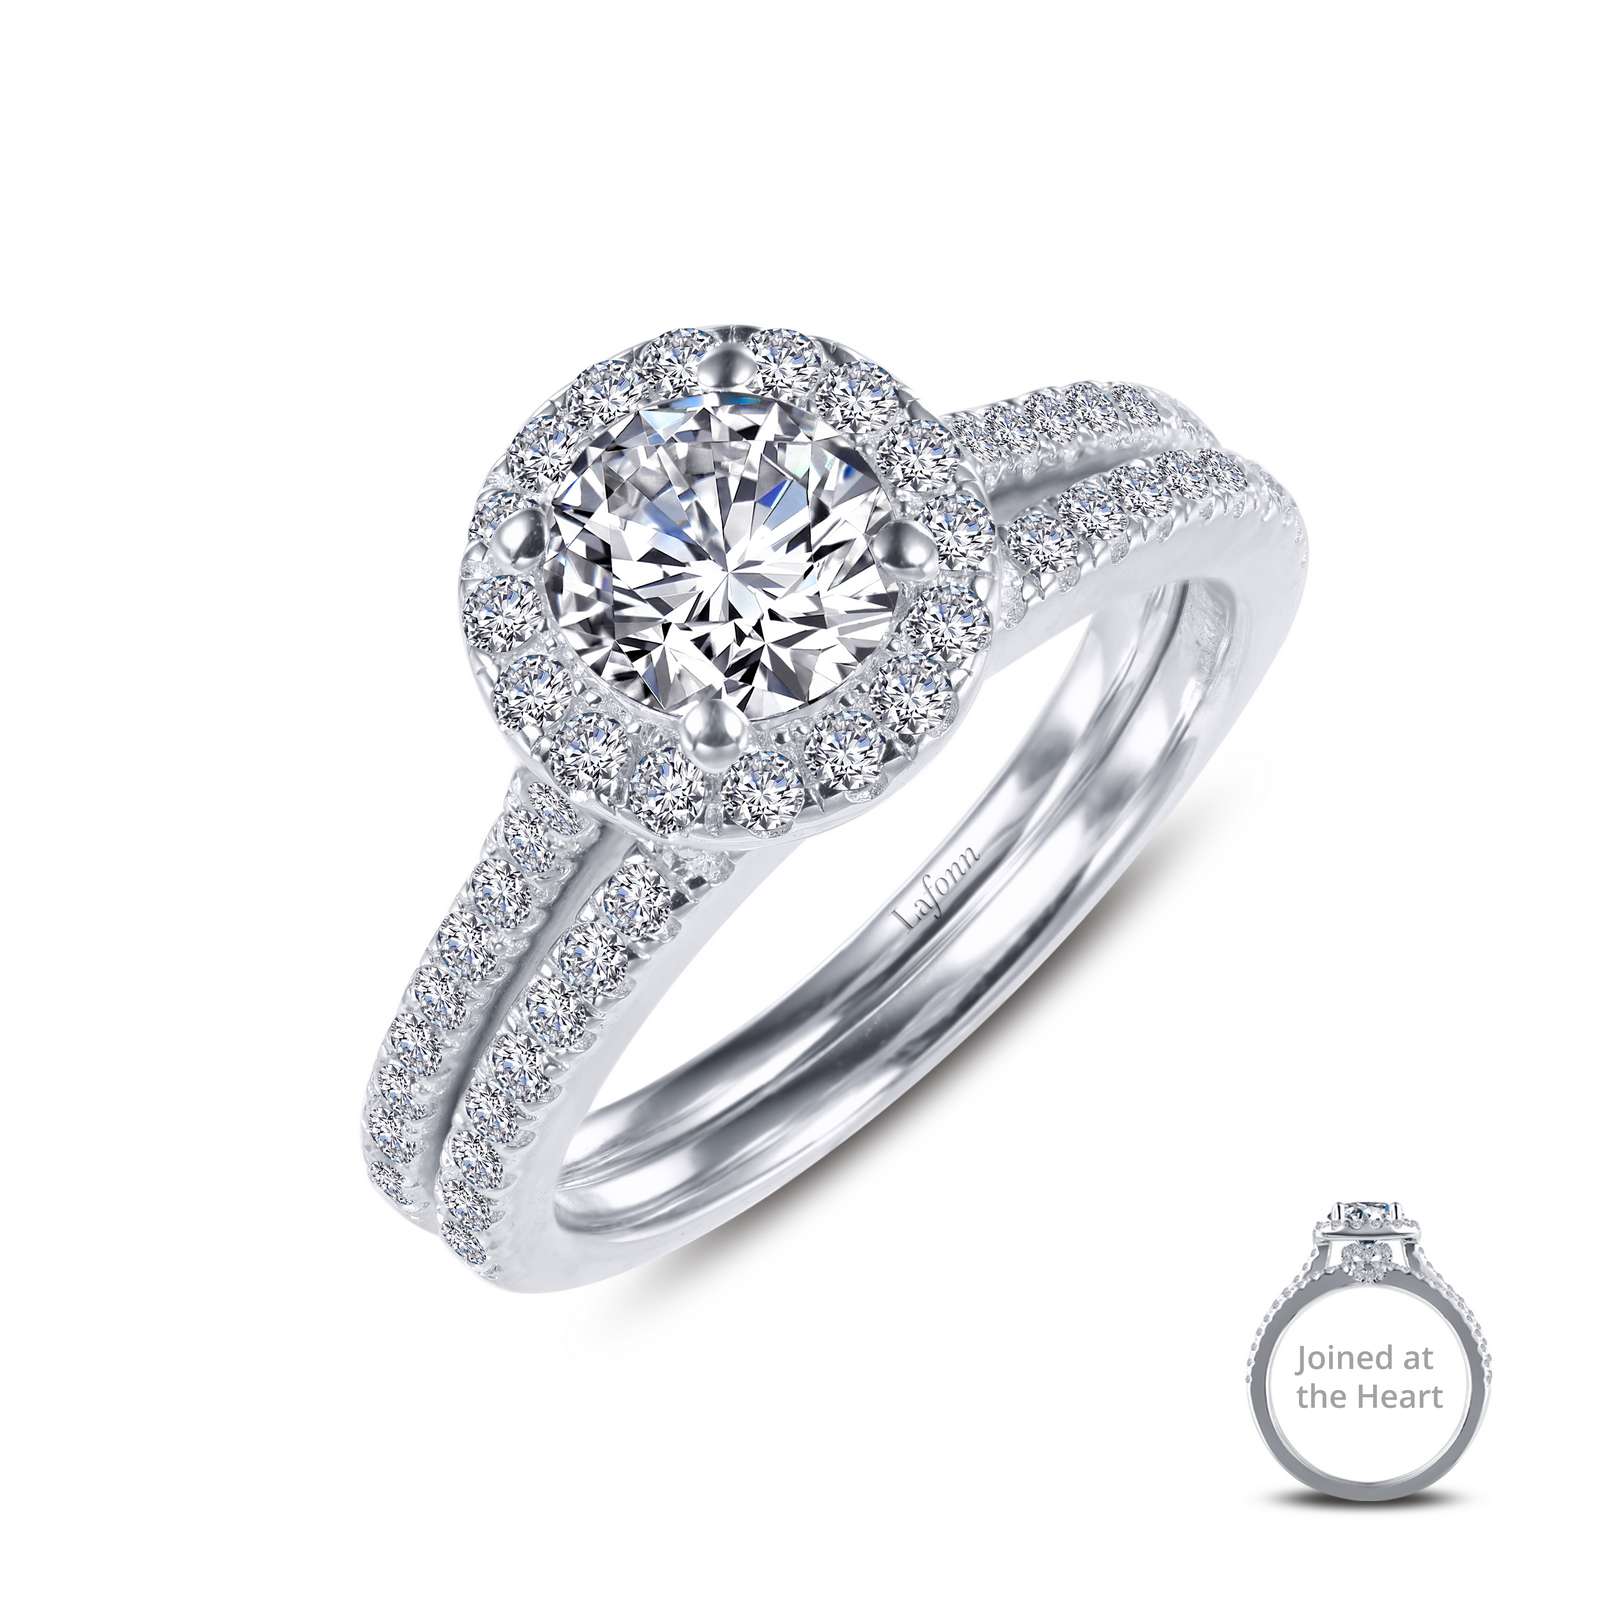 Joined-At-The-Heart Wedding Set Griner Jewelry Co. Moultrie, GA